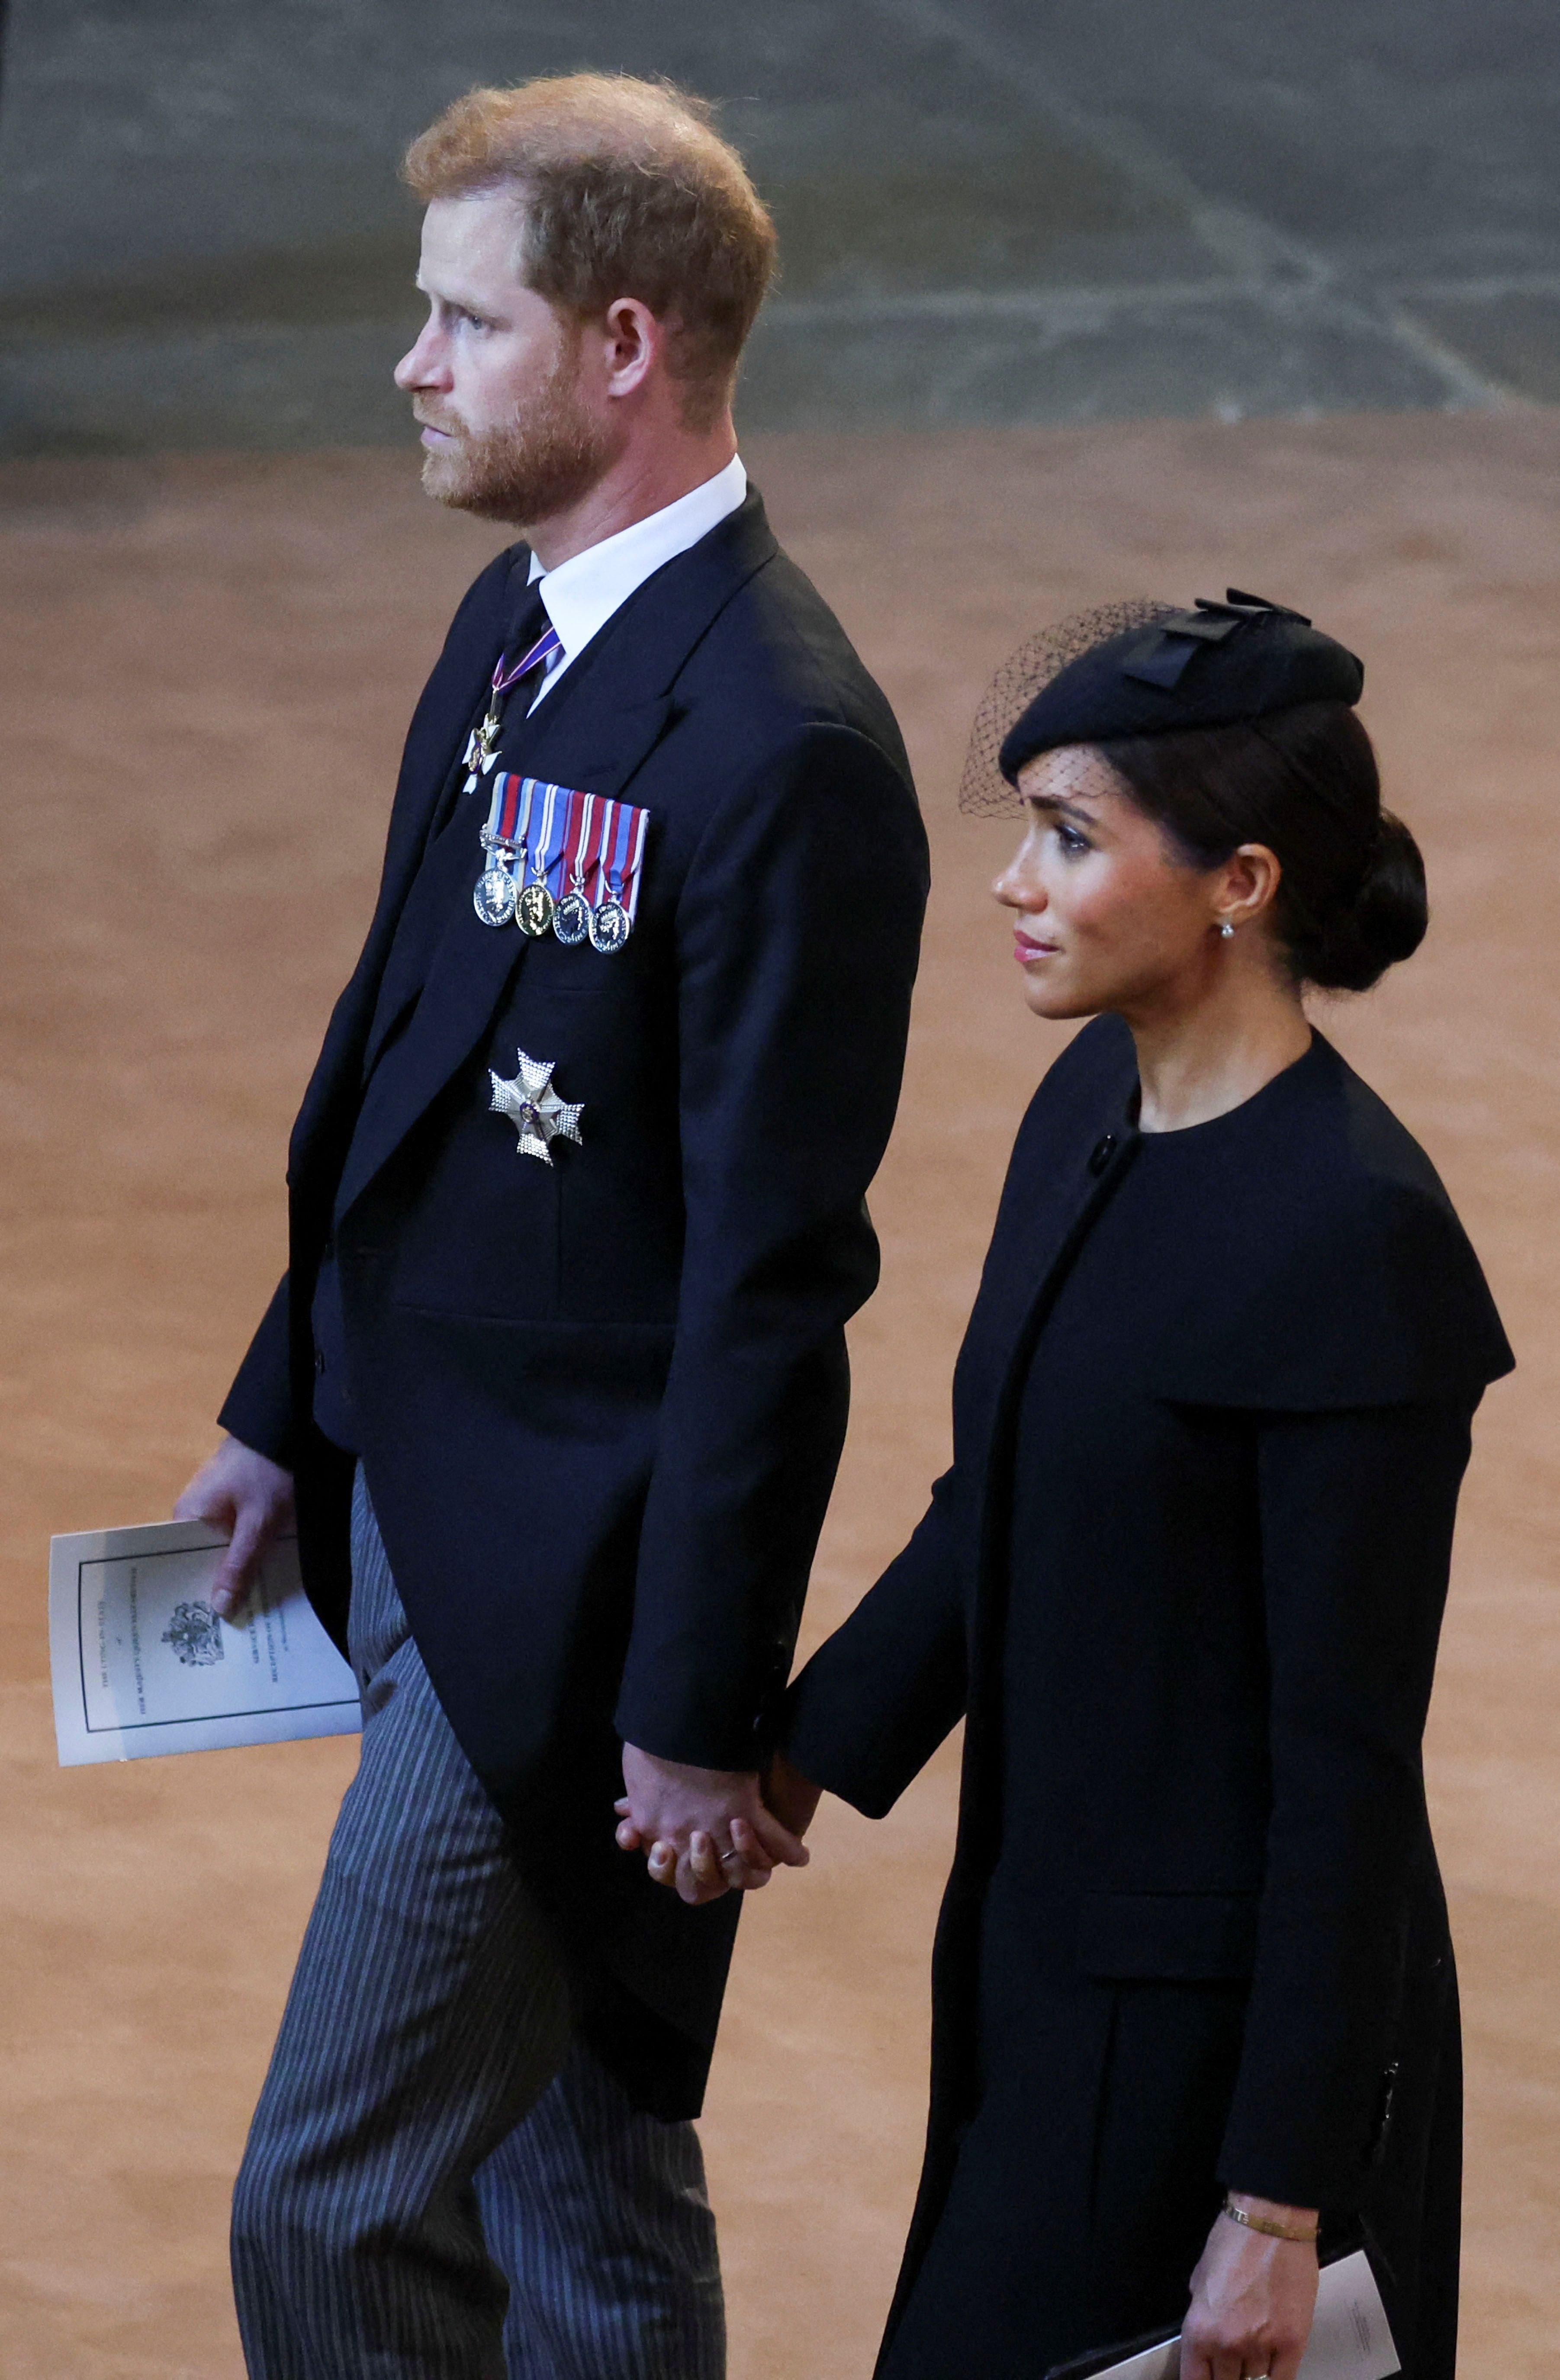 Prince Harry and Duchess Meghan leave after a service for Queen Elizabeth II's coffin reception in Westminster Hall, at the Palace of Westminster in London on September 14, 2022 |  Source: Getty Images